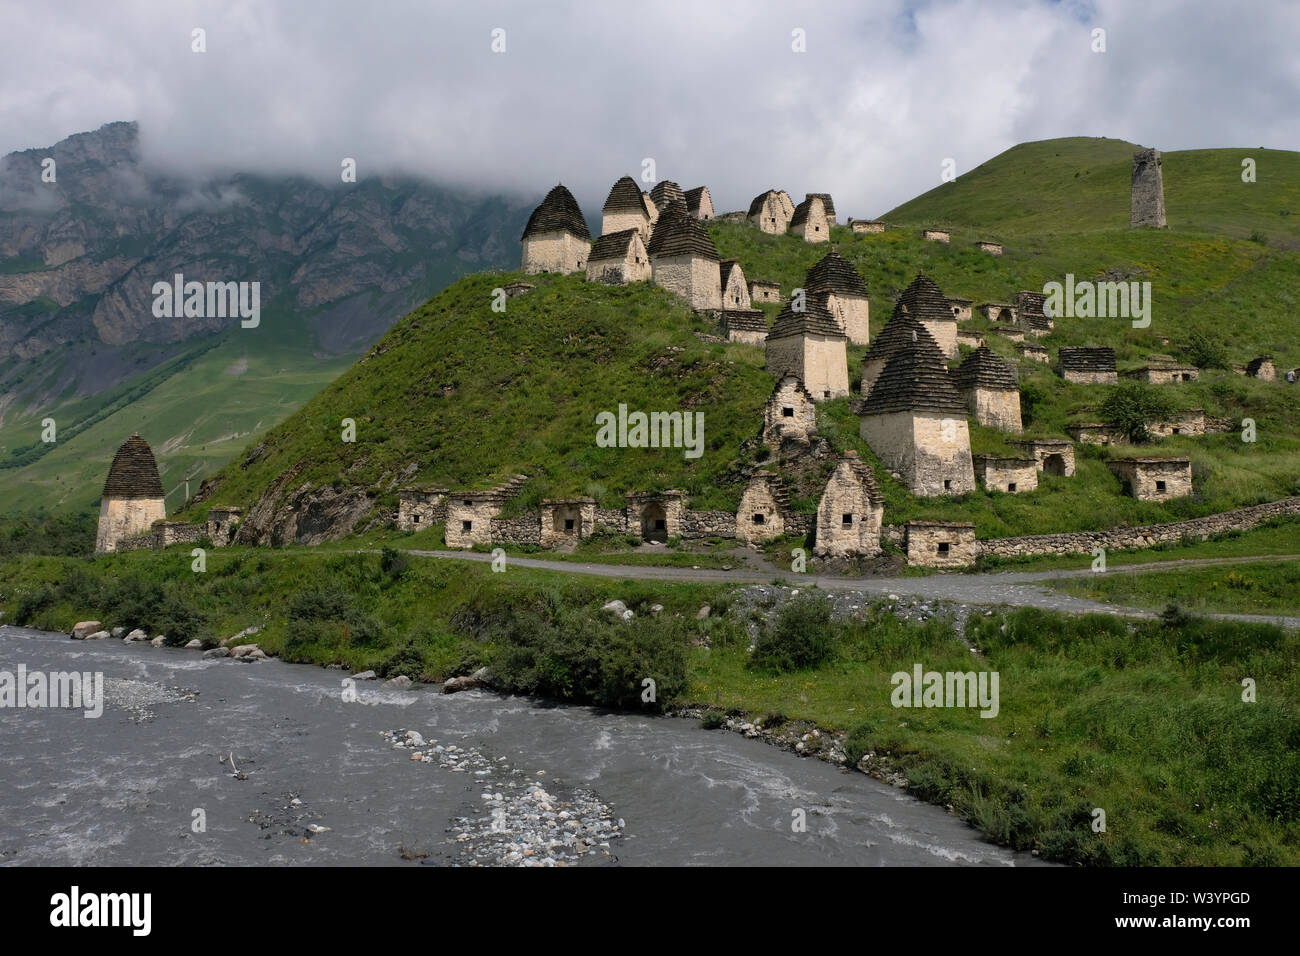 View of tombs and crypts of the Alanian necropolis dating back to the 12th century outside the village of Dargavs known locally as the “city of the dead,“ which sits on the slope of a hill overlooking the Fiagdon River in Prigorodny District of the Republic of North Ossetia-Alania in the North Caucasian Federal District of Russia. Stock Photo